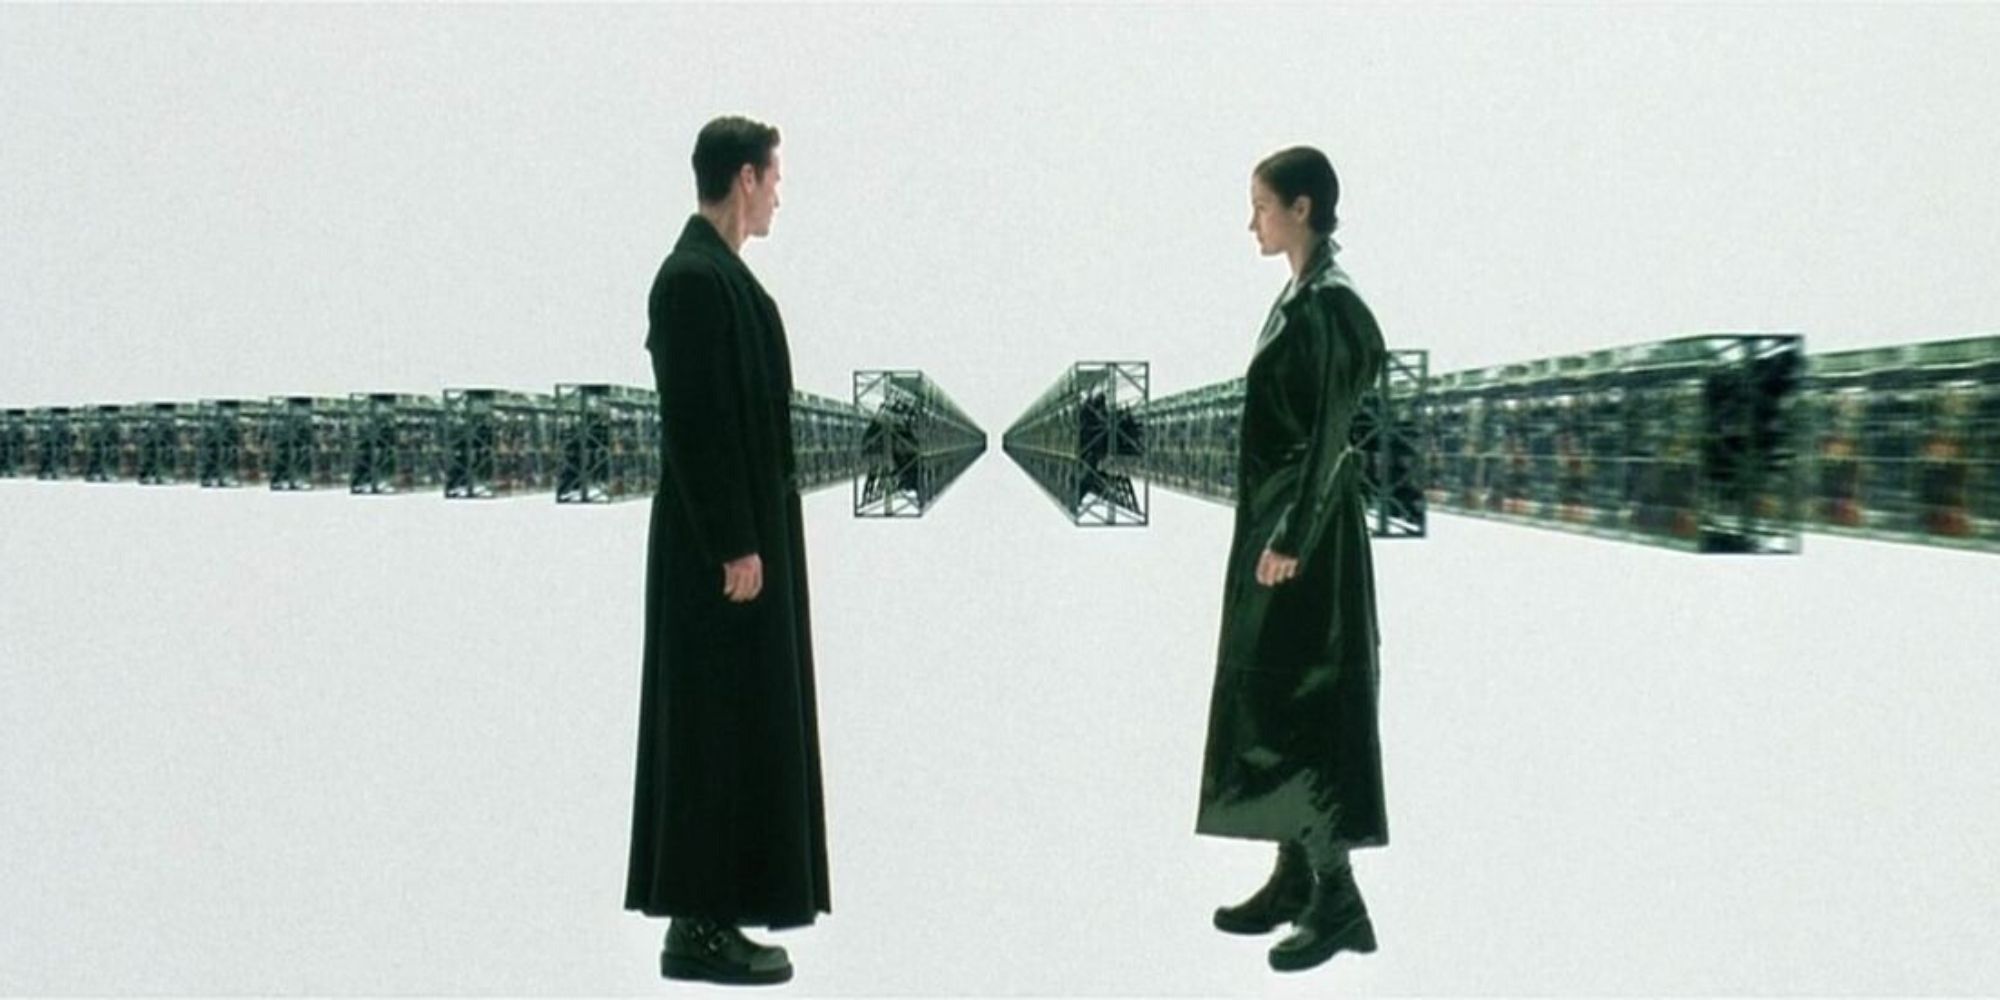 Neo and Trinity in the weapon room in The Matrix